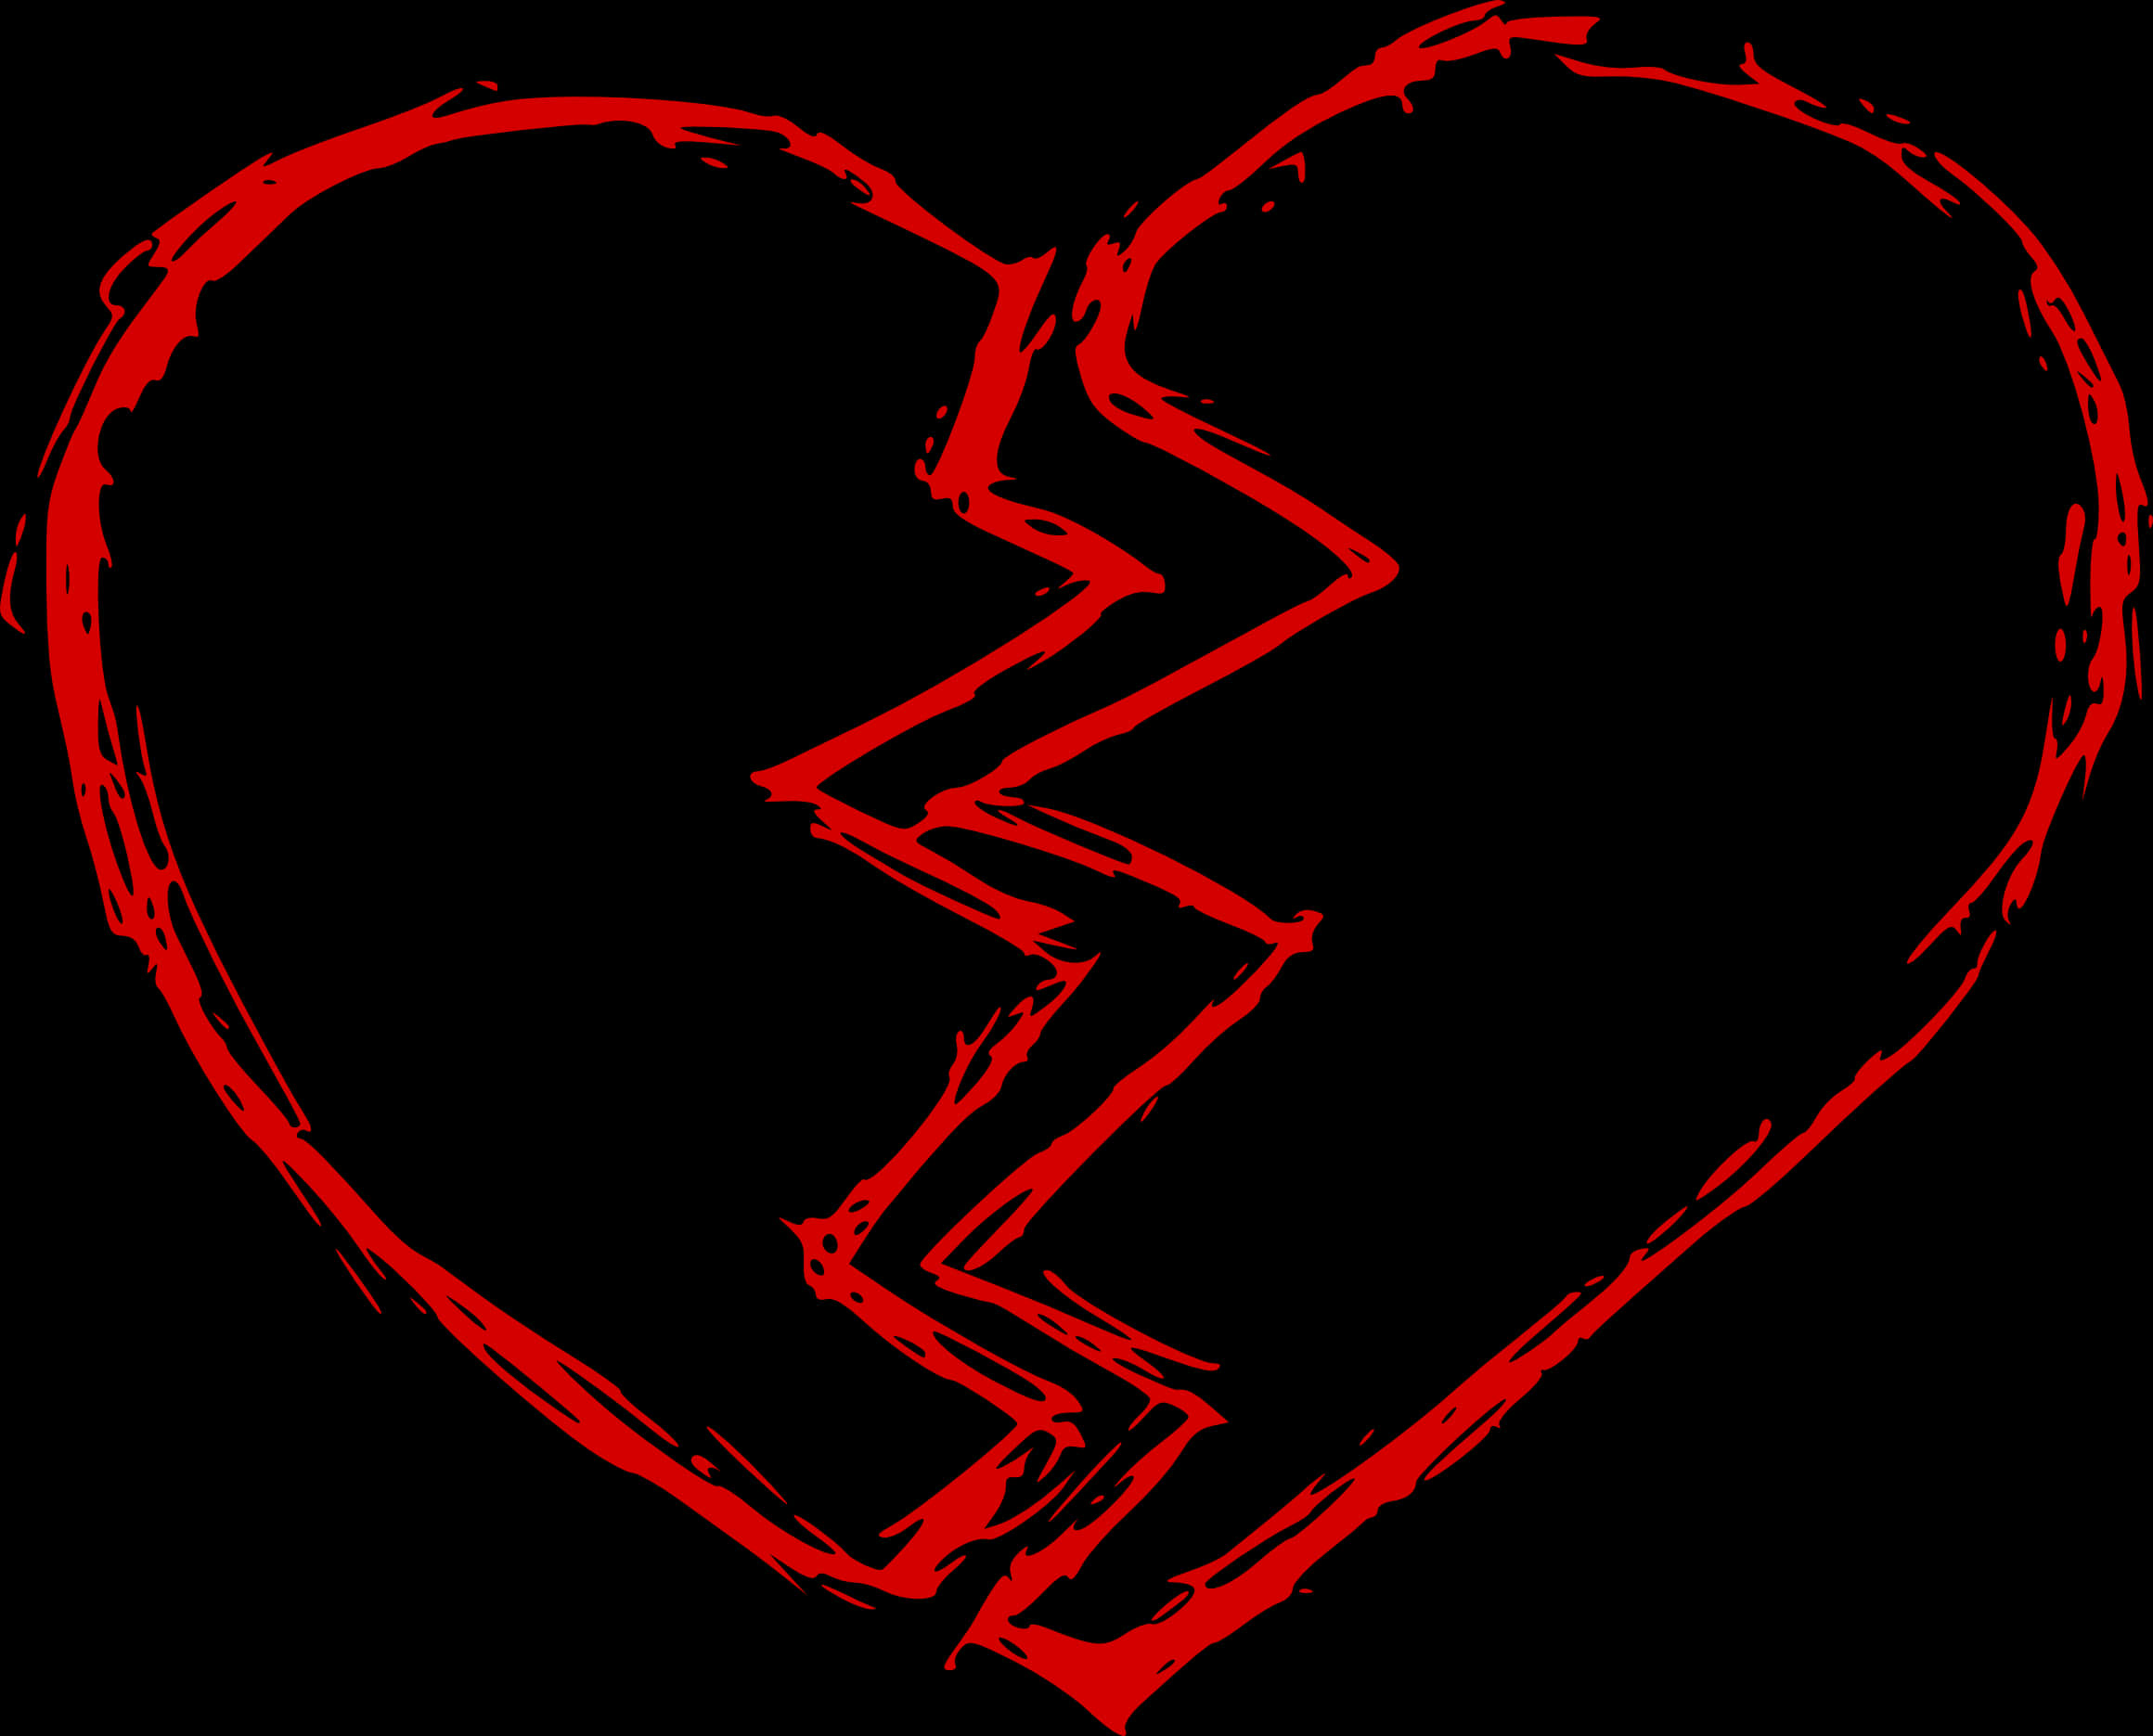 A Broken Heart Drawn In Red On A Black Background